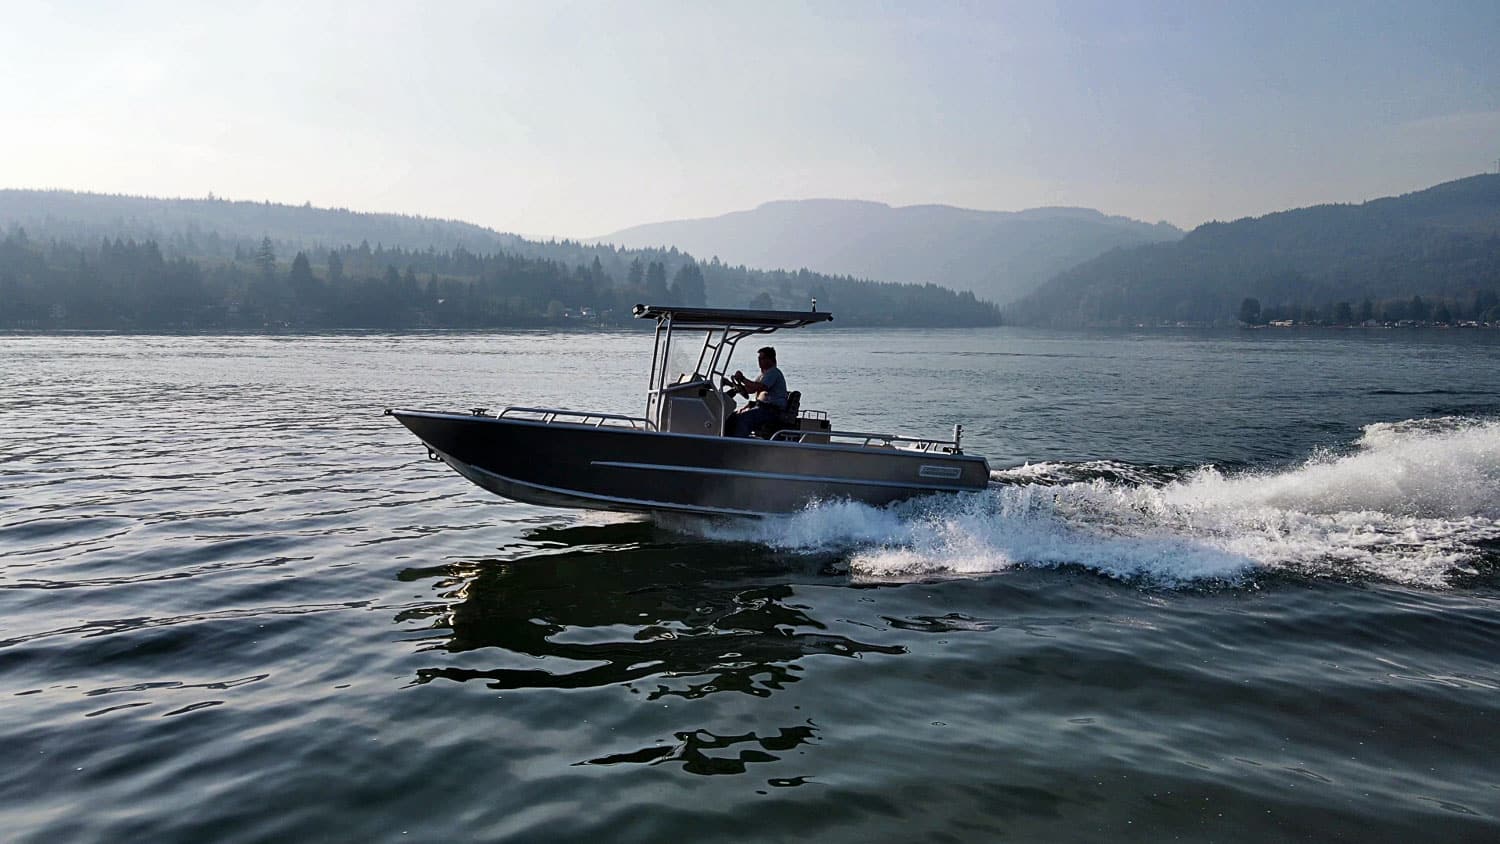 Our pro aluminum jet boat takes off in the water, leaving a trail of water spraying behind